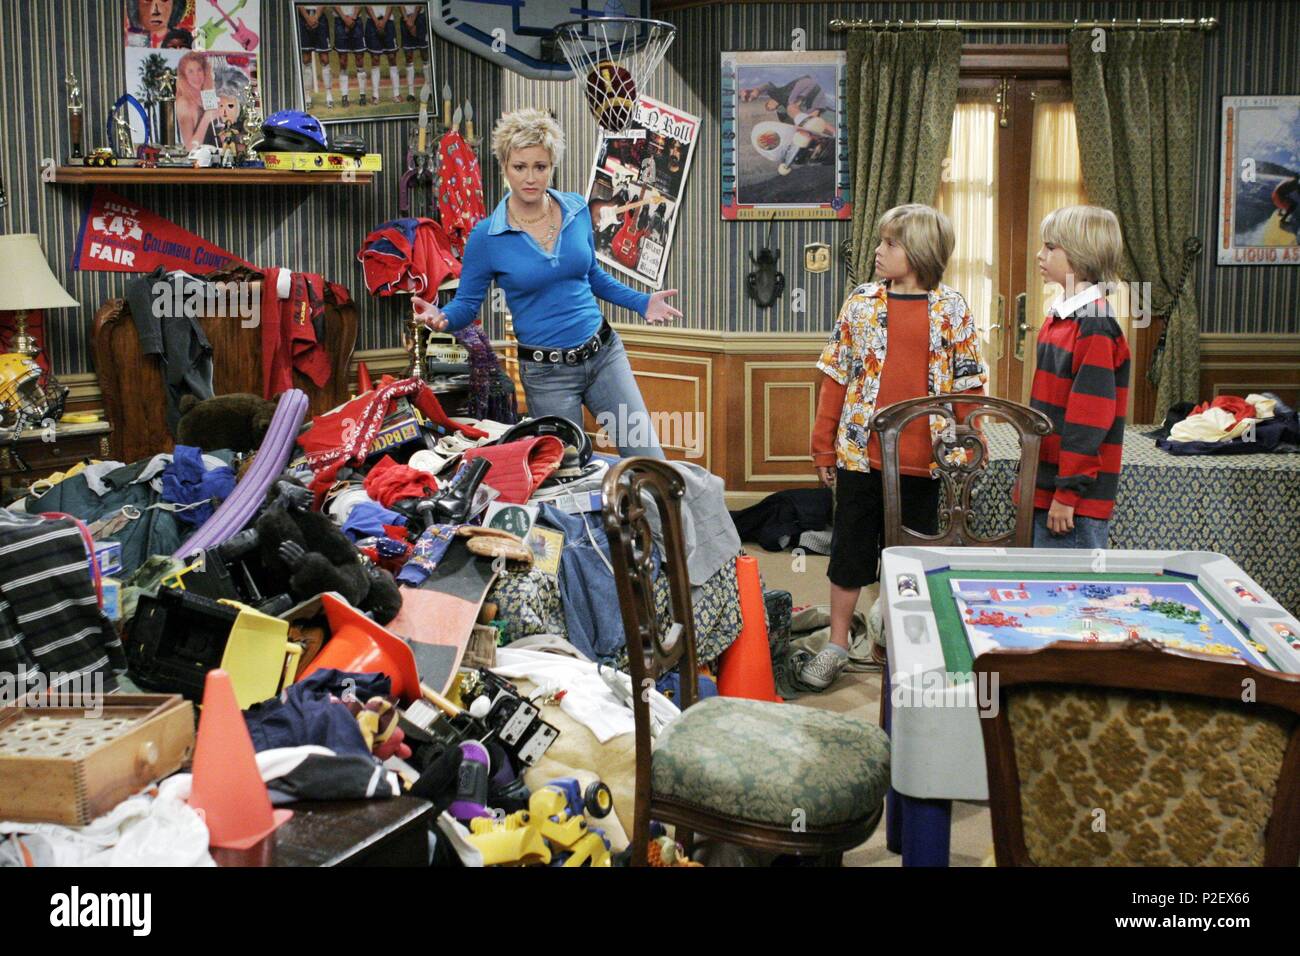 Original Film Title: SUITE LIFE OF ZACK AND CODY, THE-TV.  English Title: THE SUITE LIFE OF ZACK AND CODY.  Year: 2005.  Stars: COLE SPROUSE; DYLAN SPROUSE; KIM RHODES. Credit: WALT DISNEY TELEVISION / Album Stock Photo